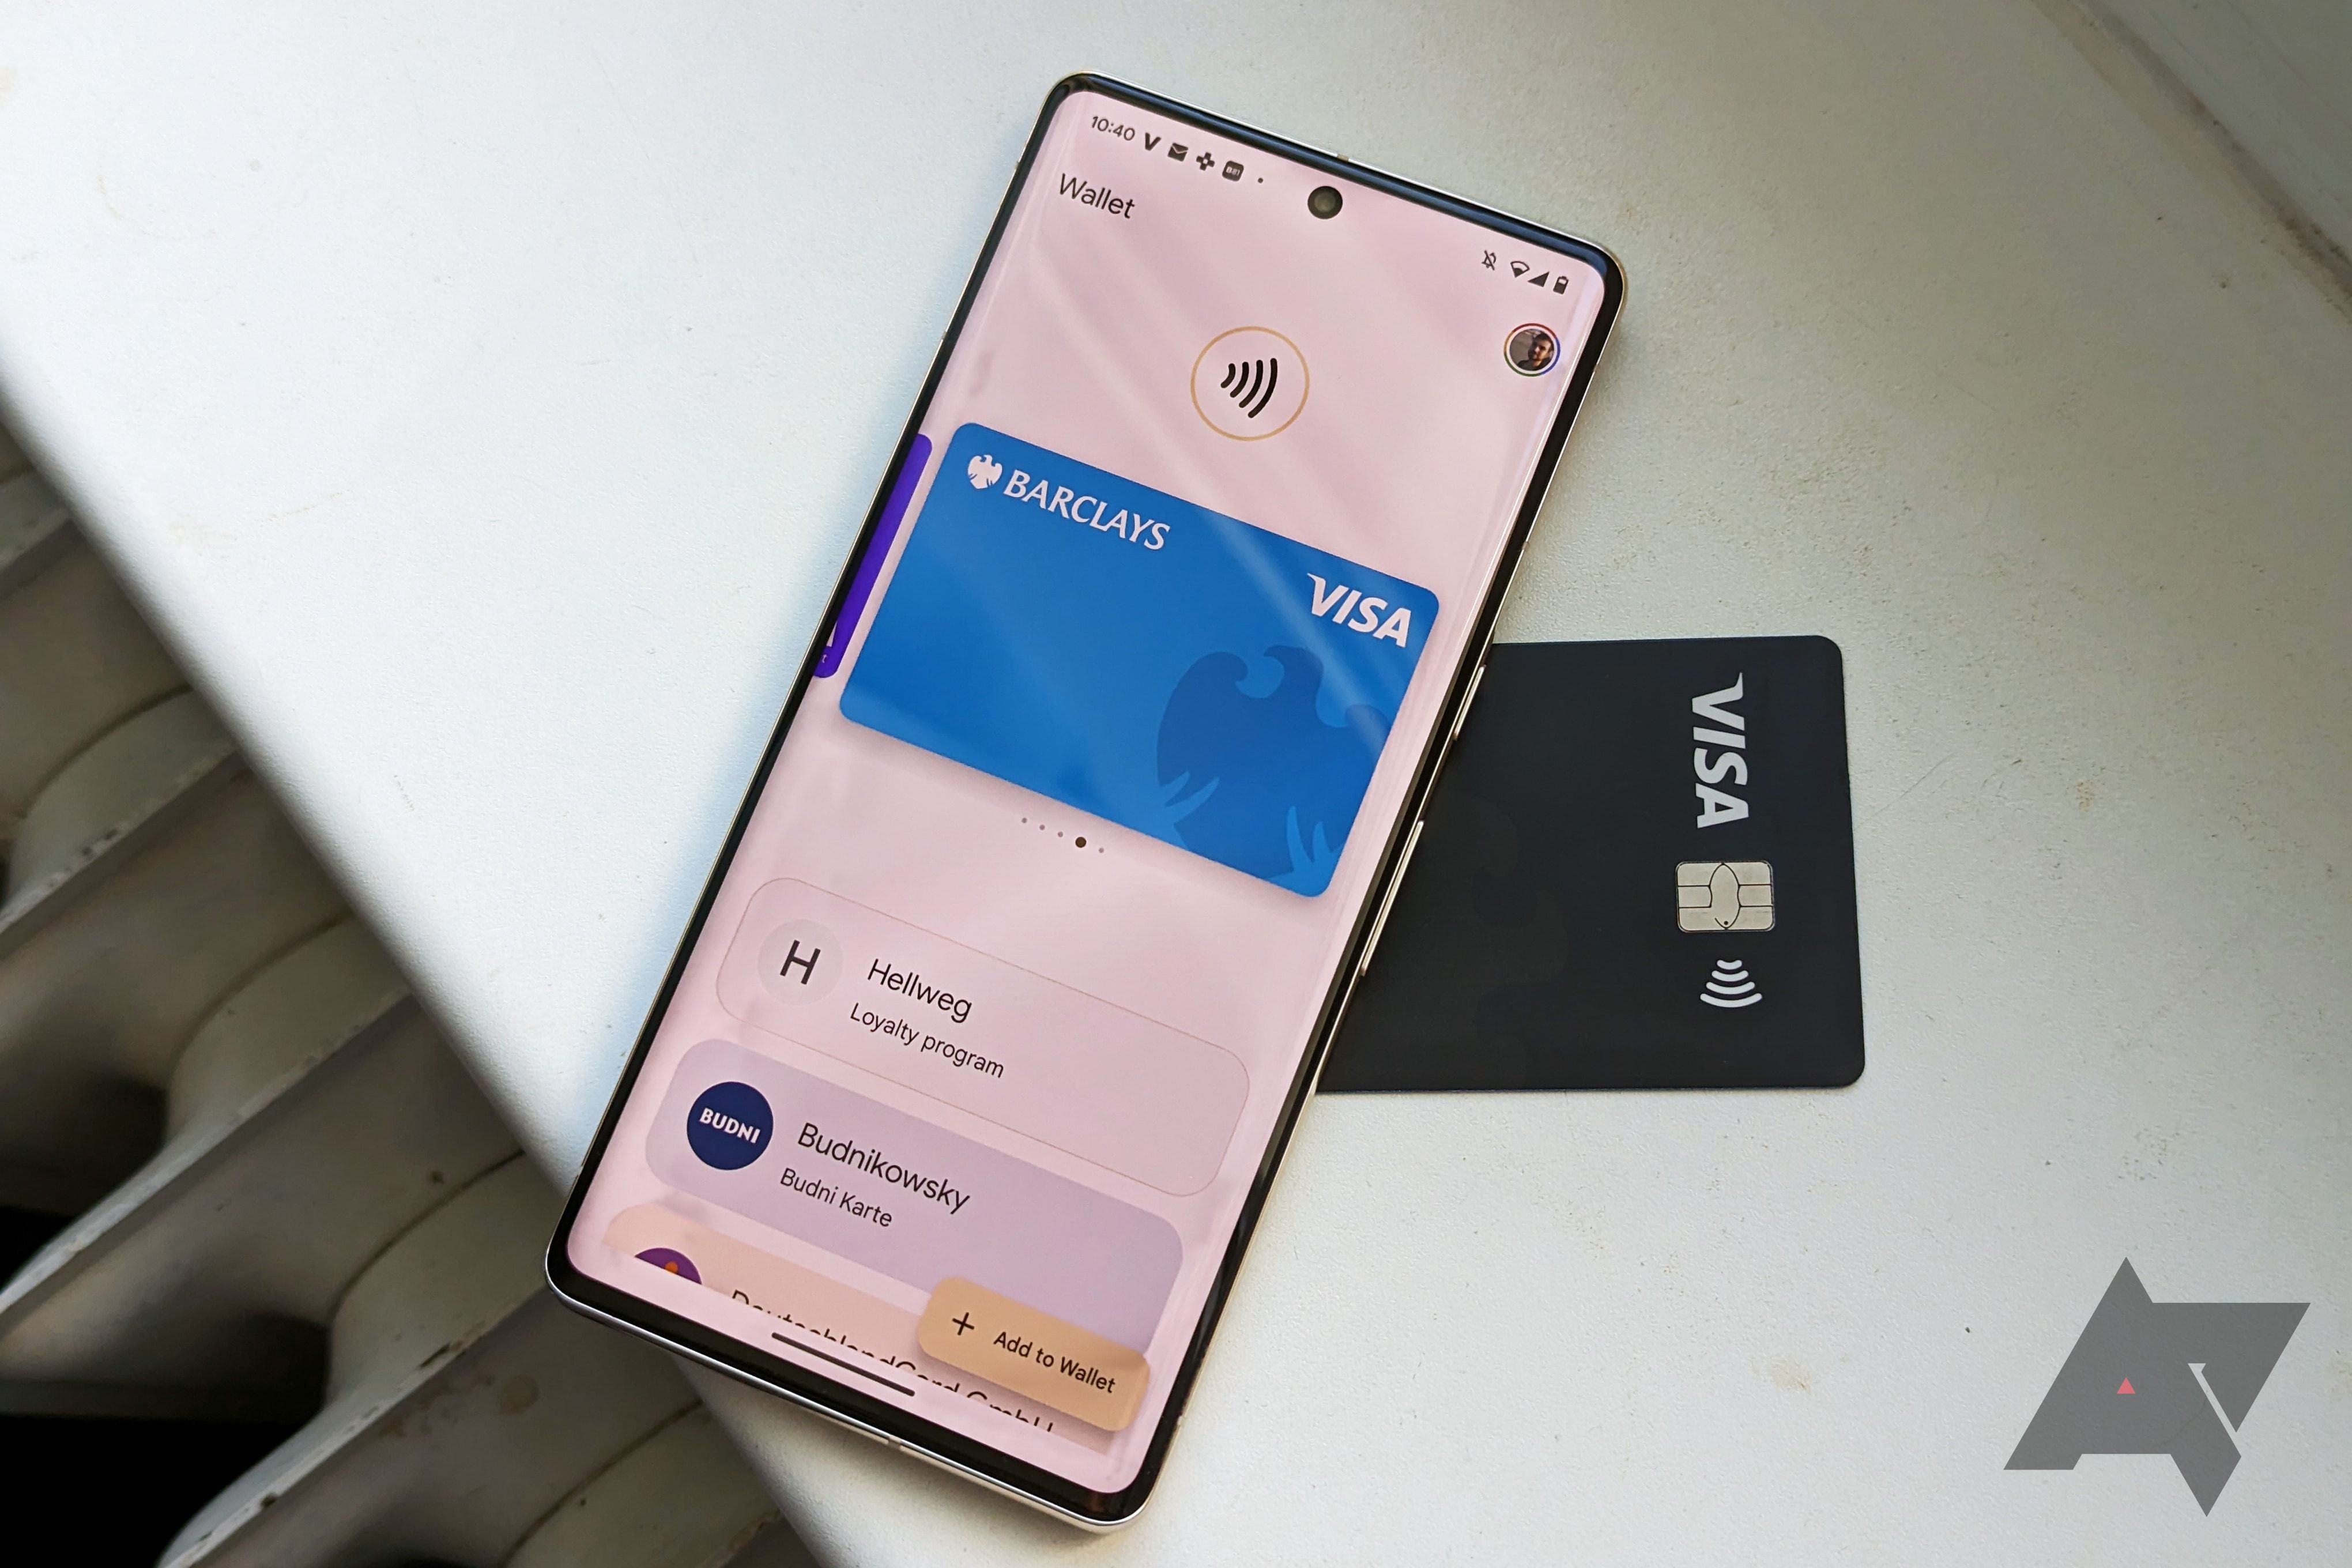 A Pixel phone displaying Google Pay with a blue Visa card while the phone rests on top of an actual black visa card.